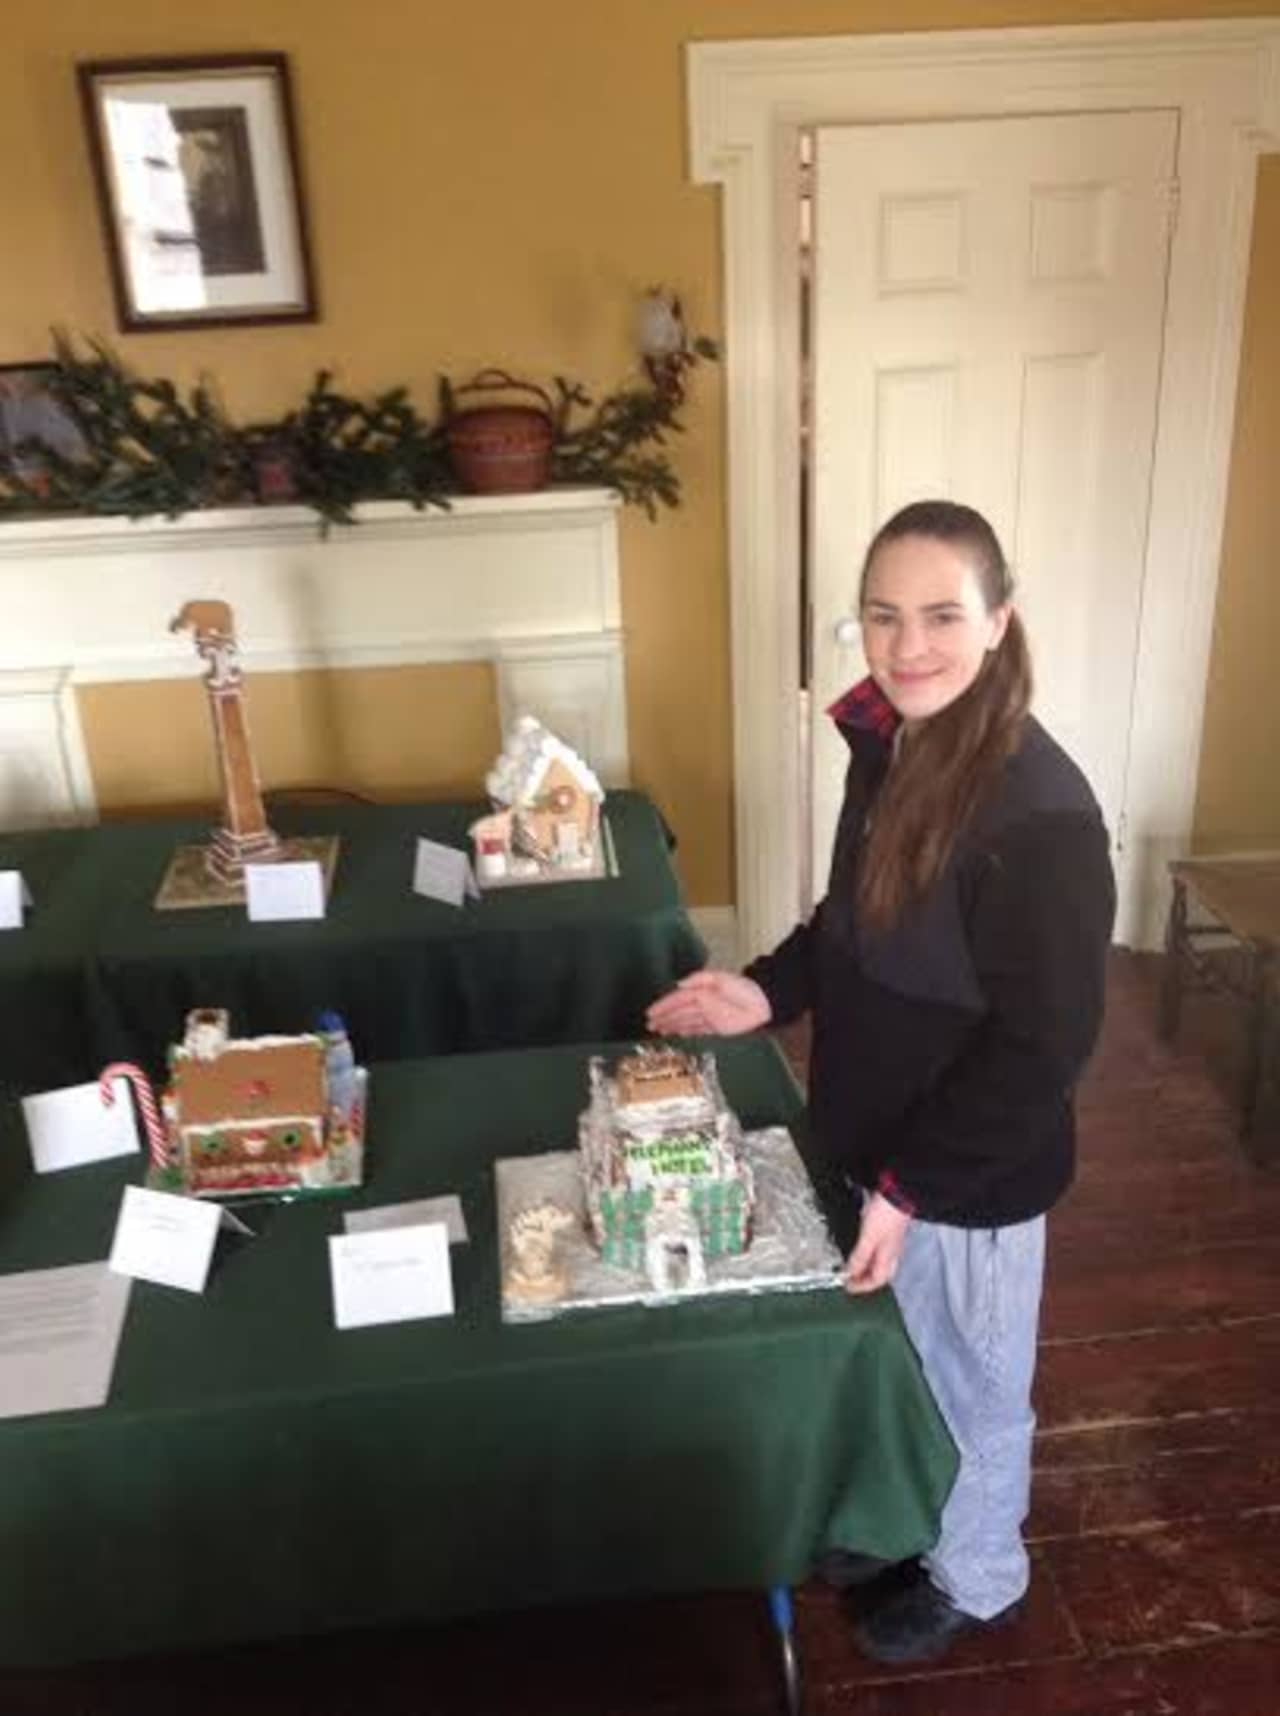 Pastry Chef Patrice Lovell with The Elephant Hotel gingerbread house, recipient of the Pastry Chef award in the Somers Historical  Society Gingerbread festival.